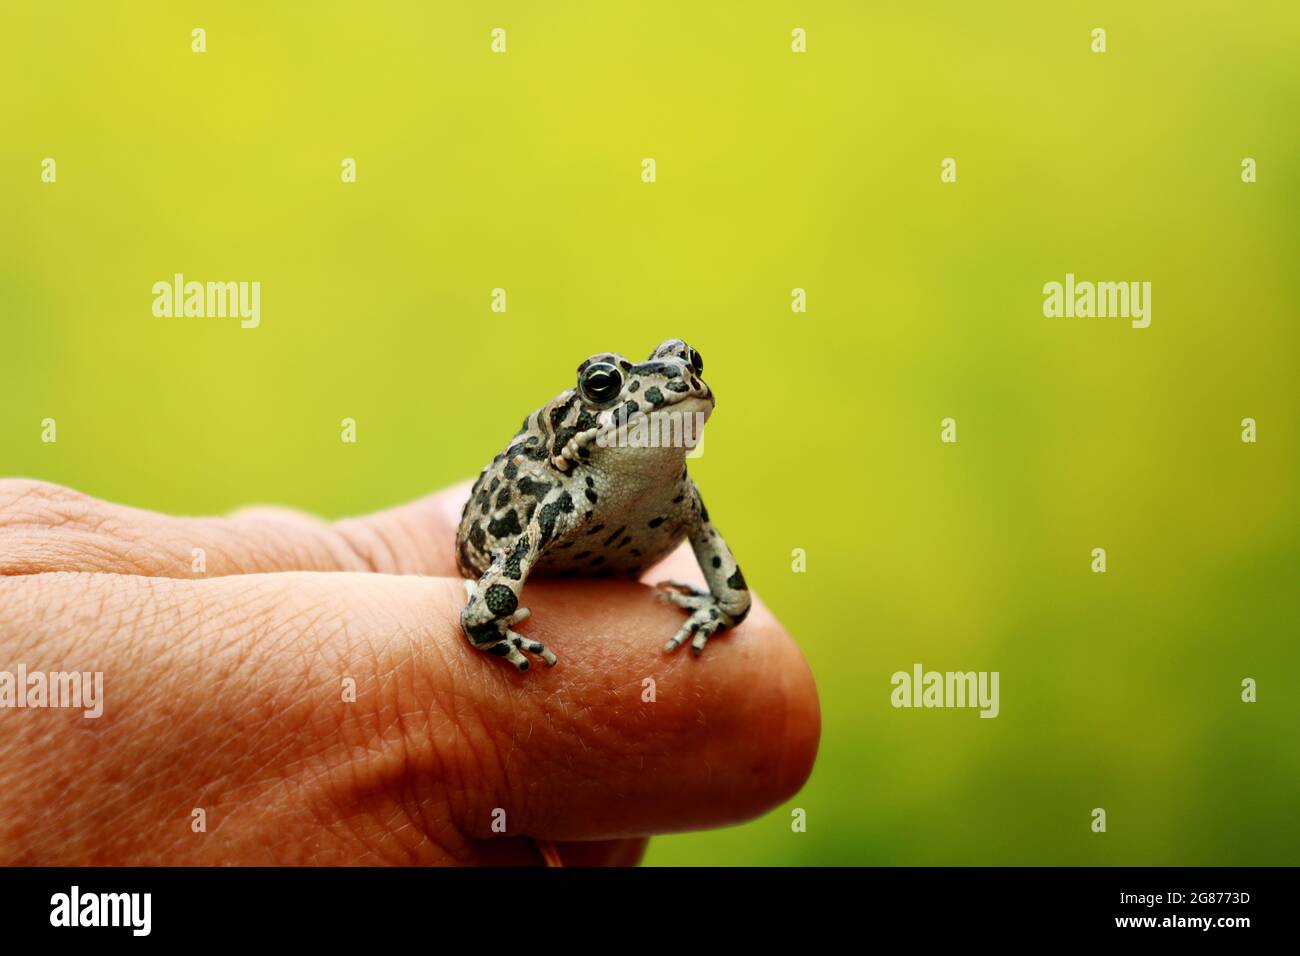 Closeup of human hand holding a tiny frog on a green blurred background Stock Photo